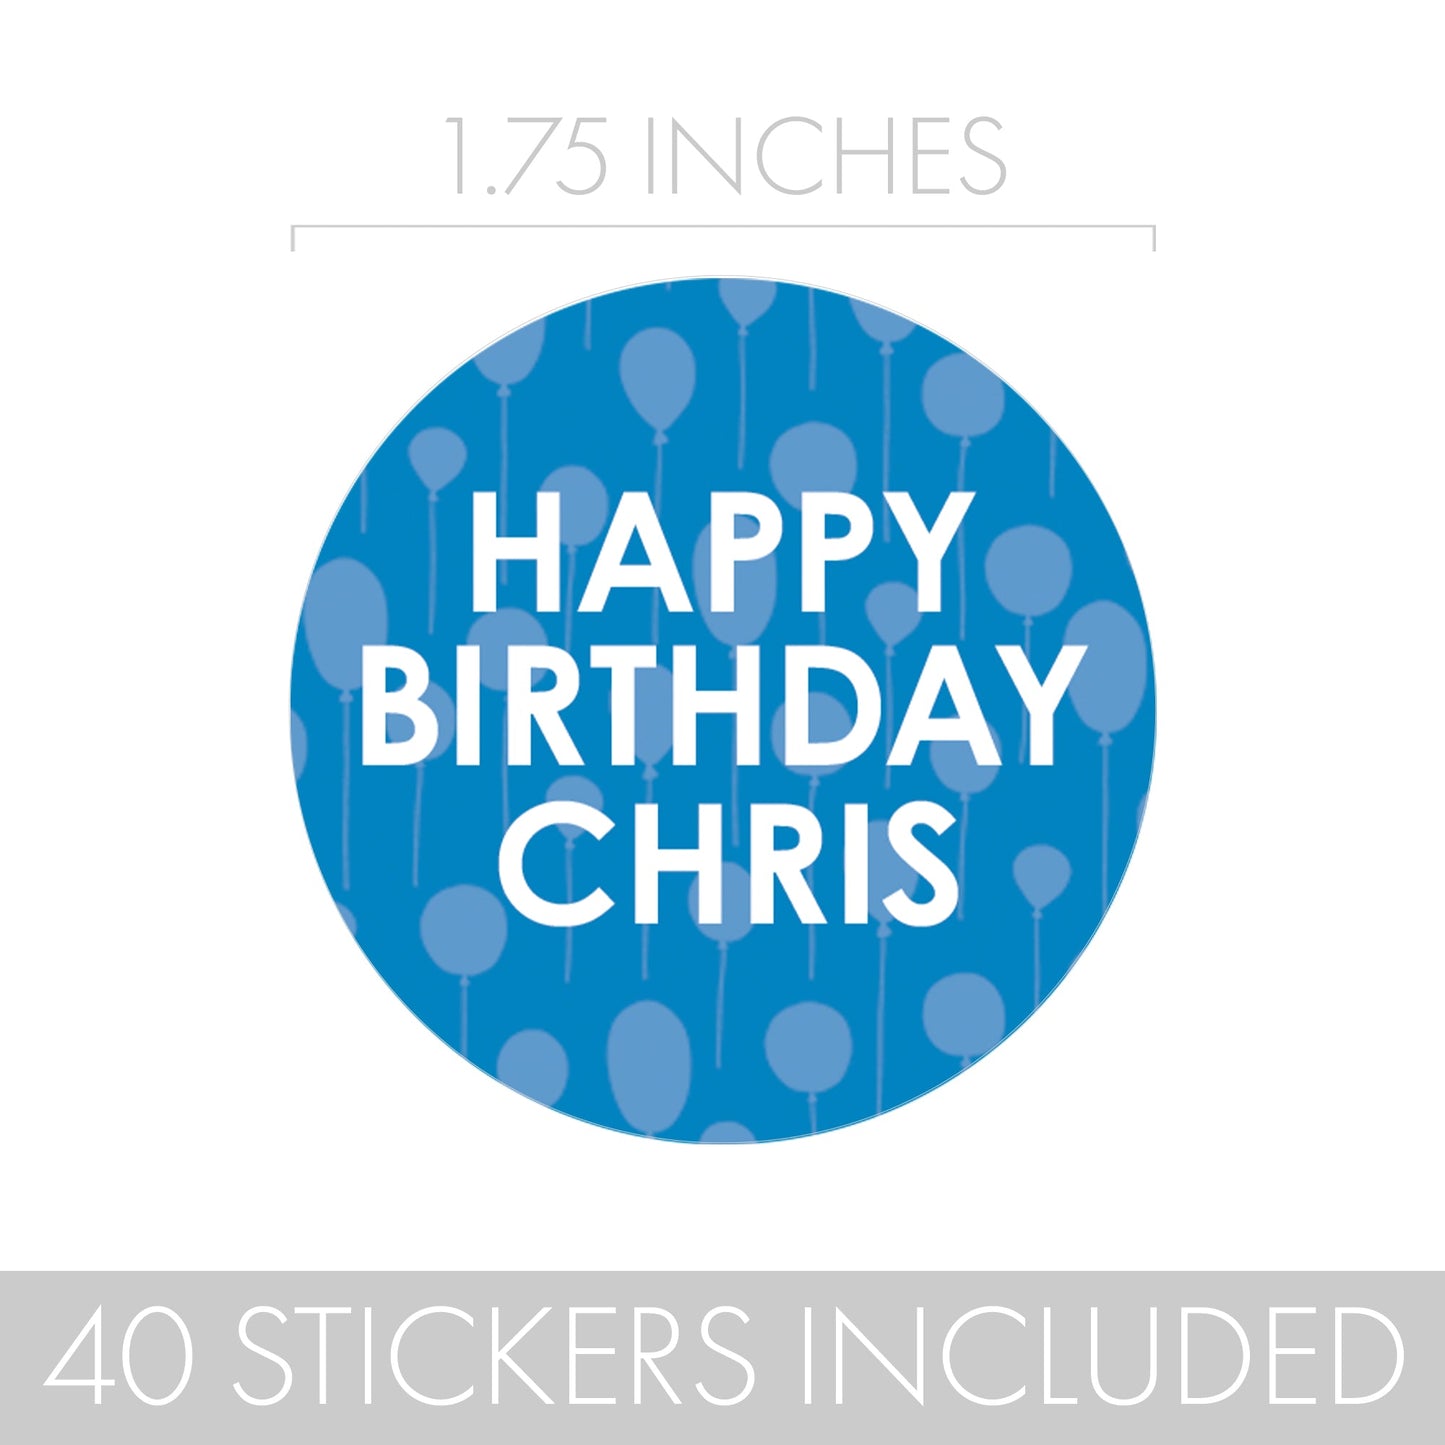 Personalized Happy Birthday Party Favor Stickers with Name - 1.75 in - 40 Labels